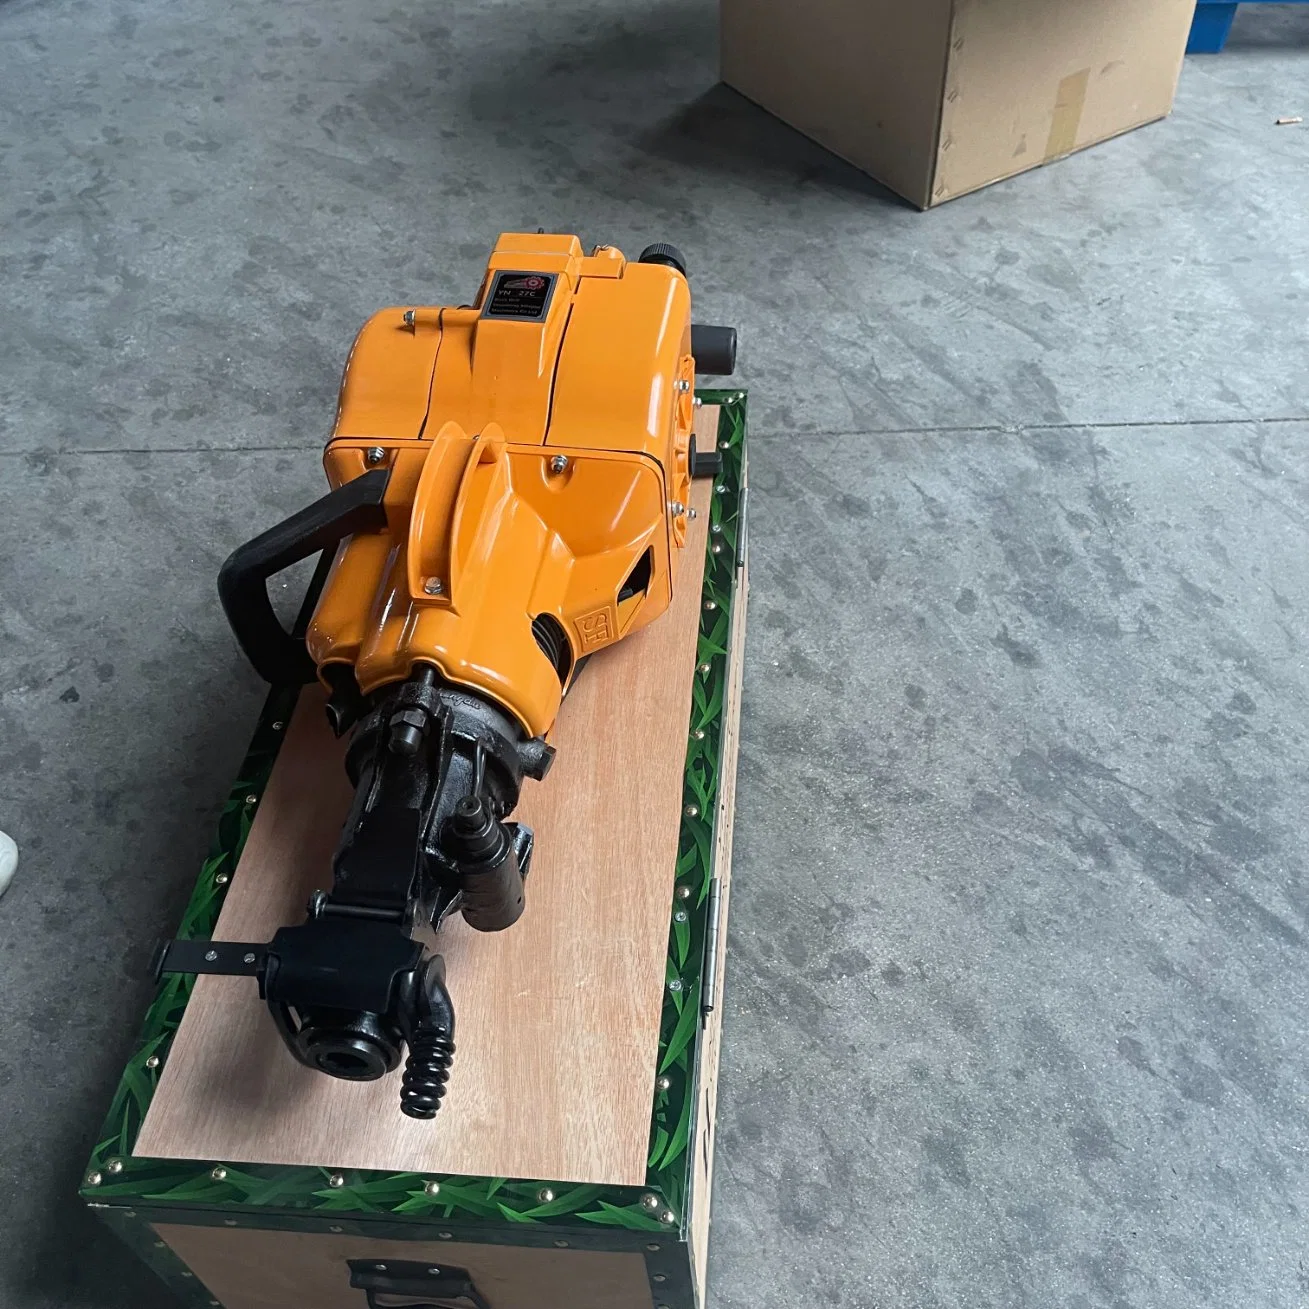 Percussion Drill Hand Held Rock Drilling Machine Made in China